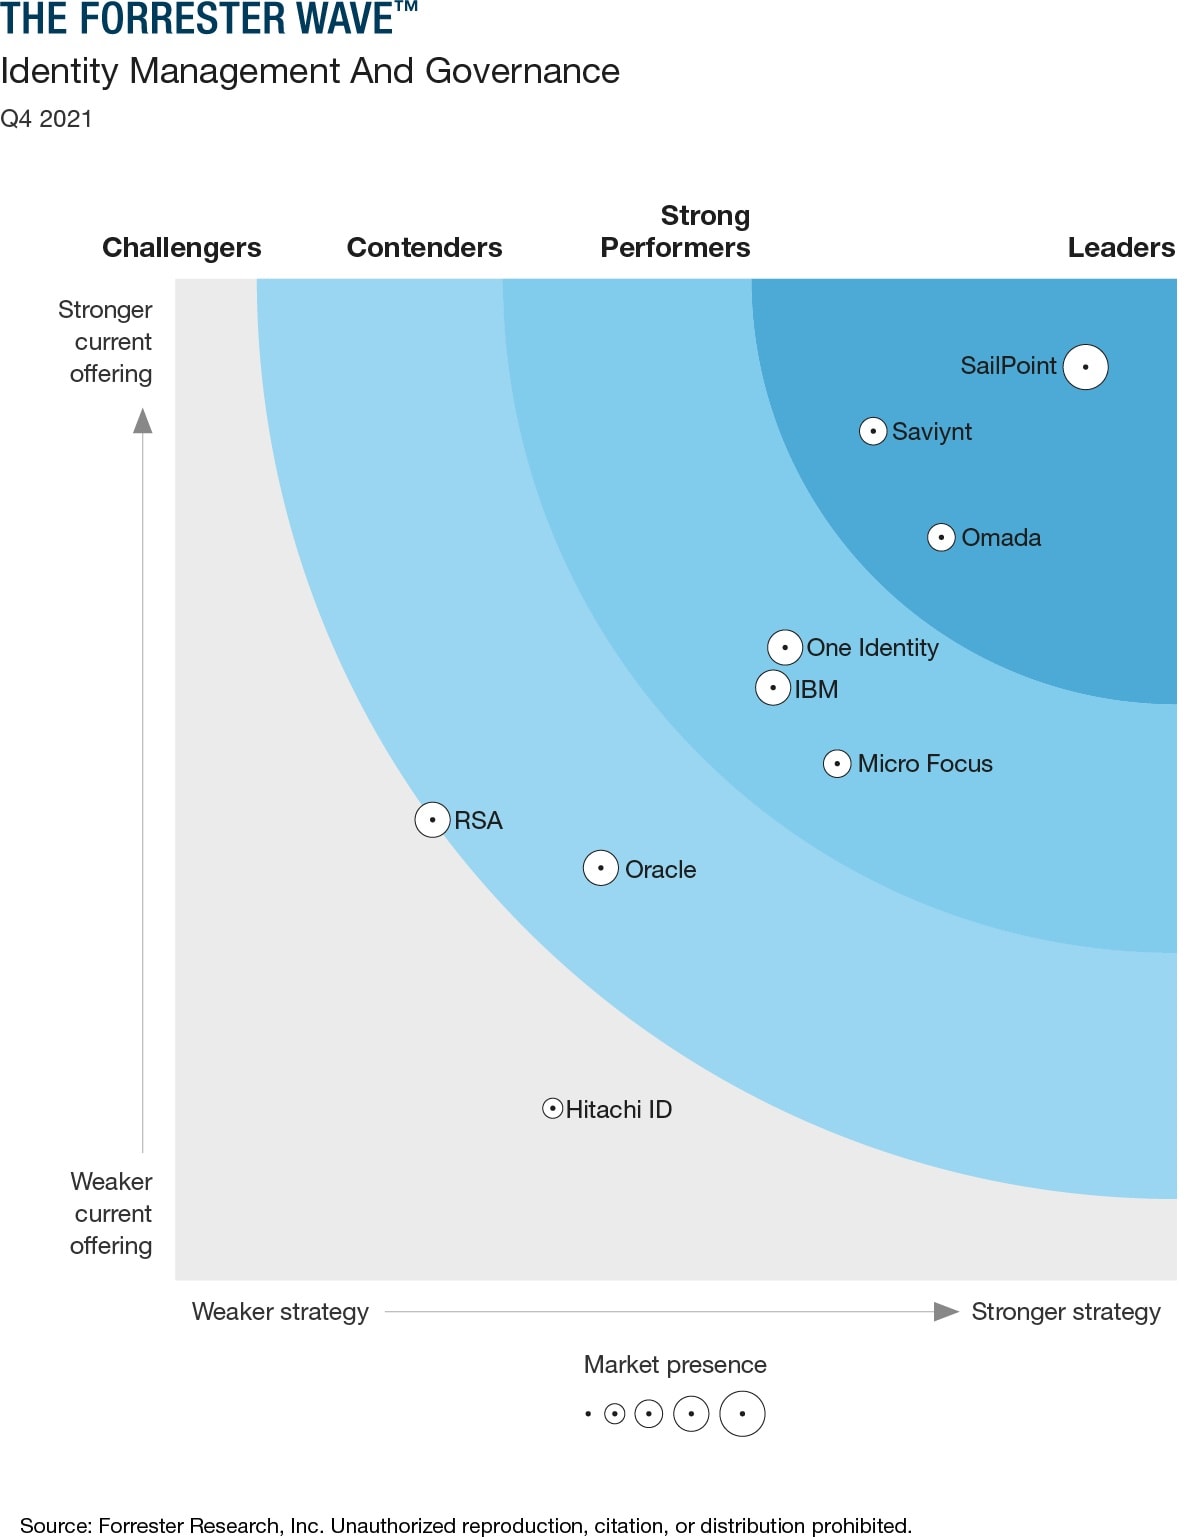 The Forrester Wave™: Identity Management and Governance, Q4 2021 report